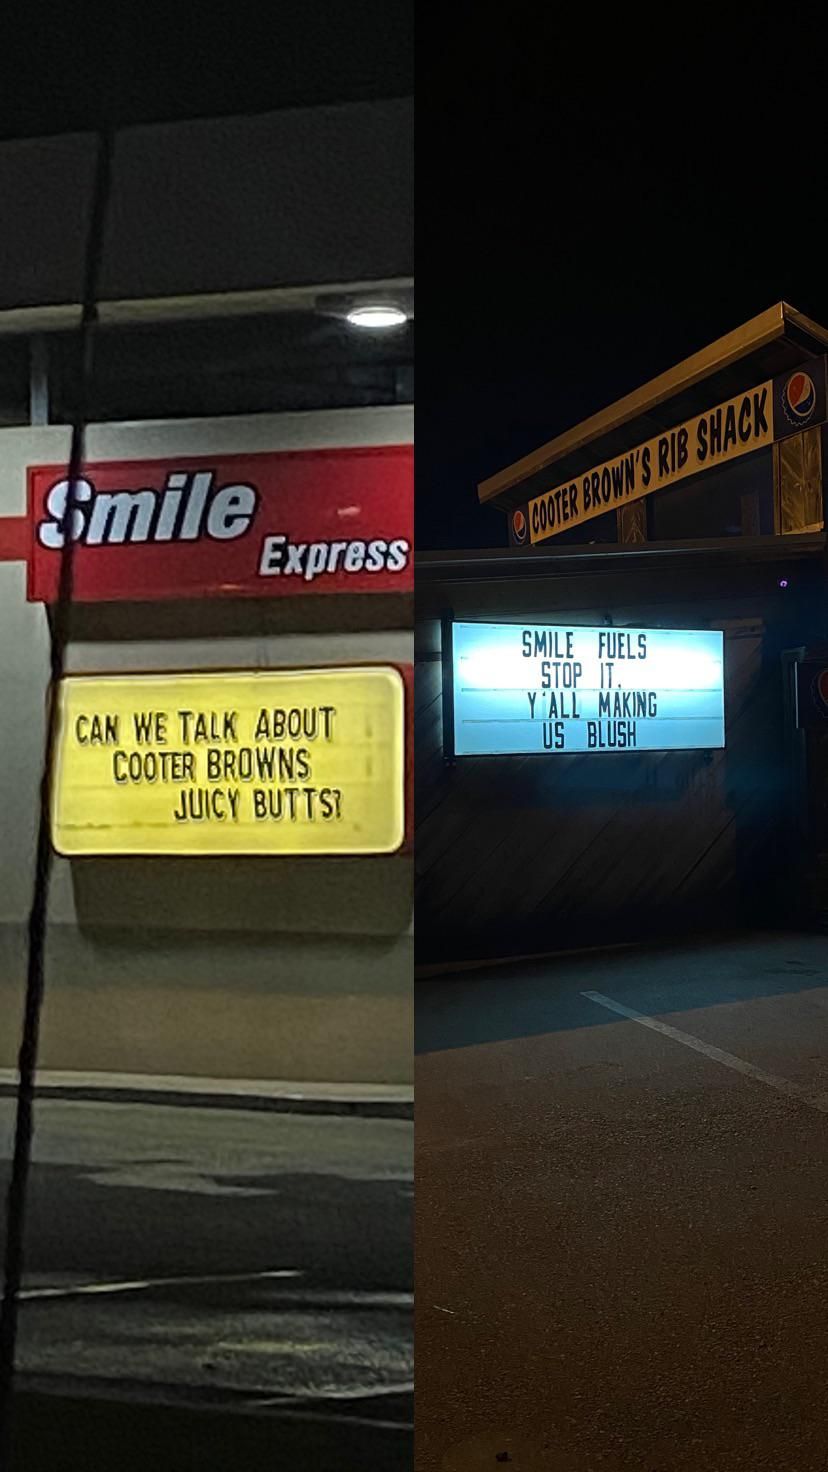 We all get a kick out of these two businesses in town making jokes on their signs